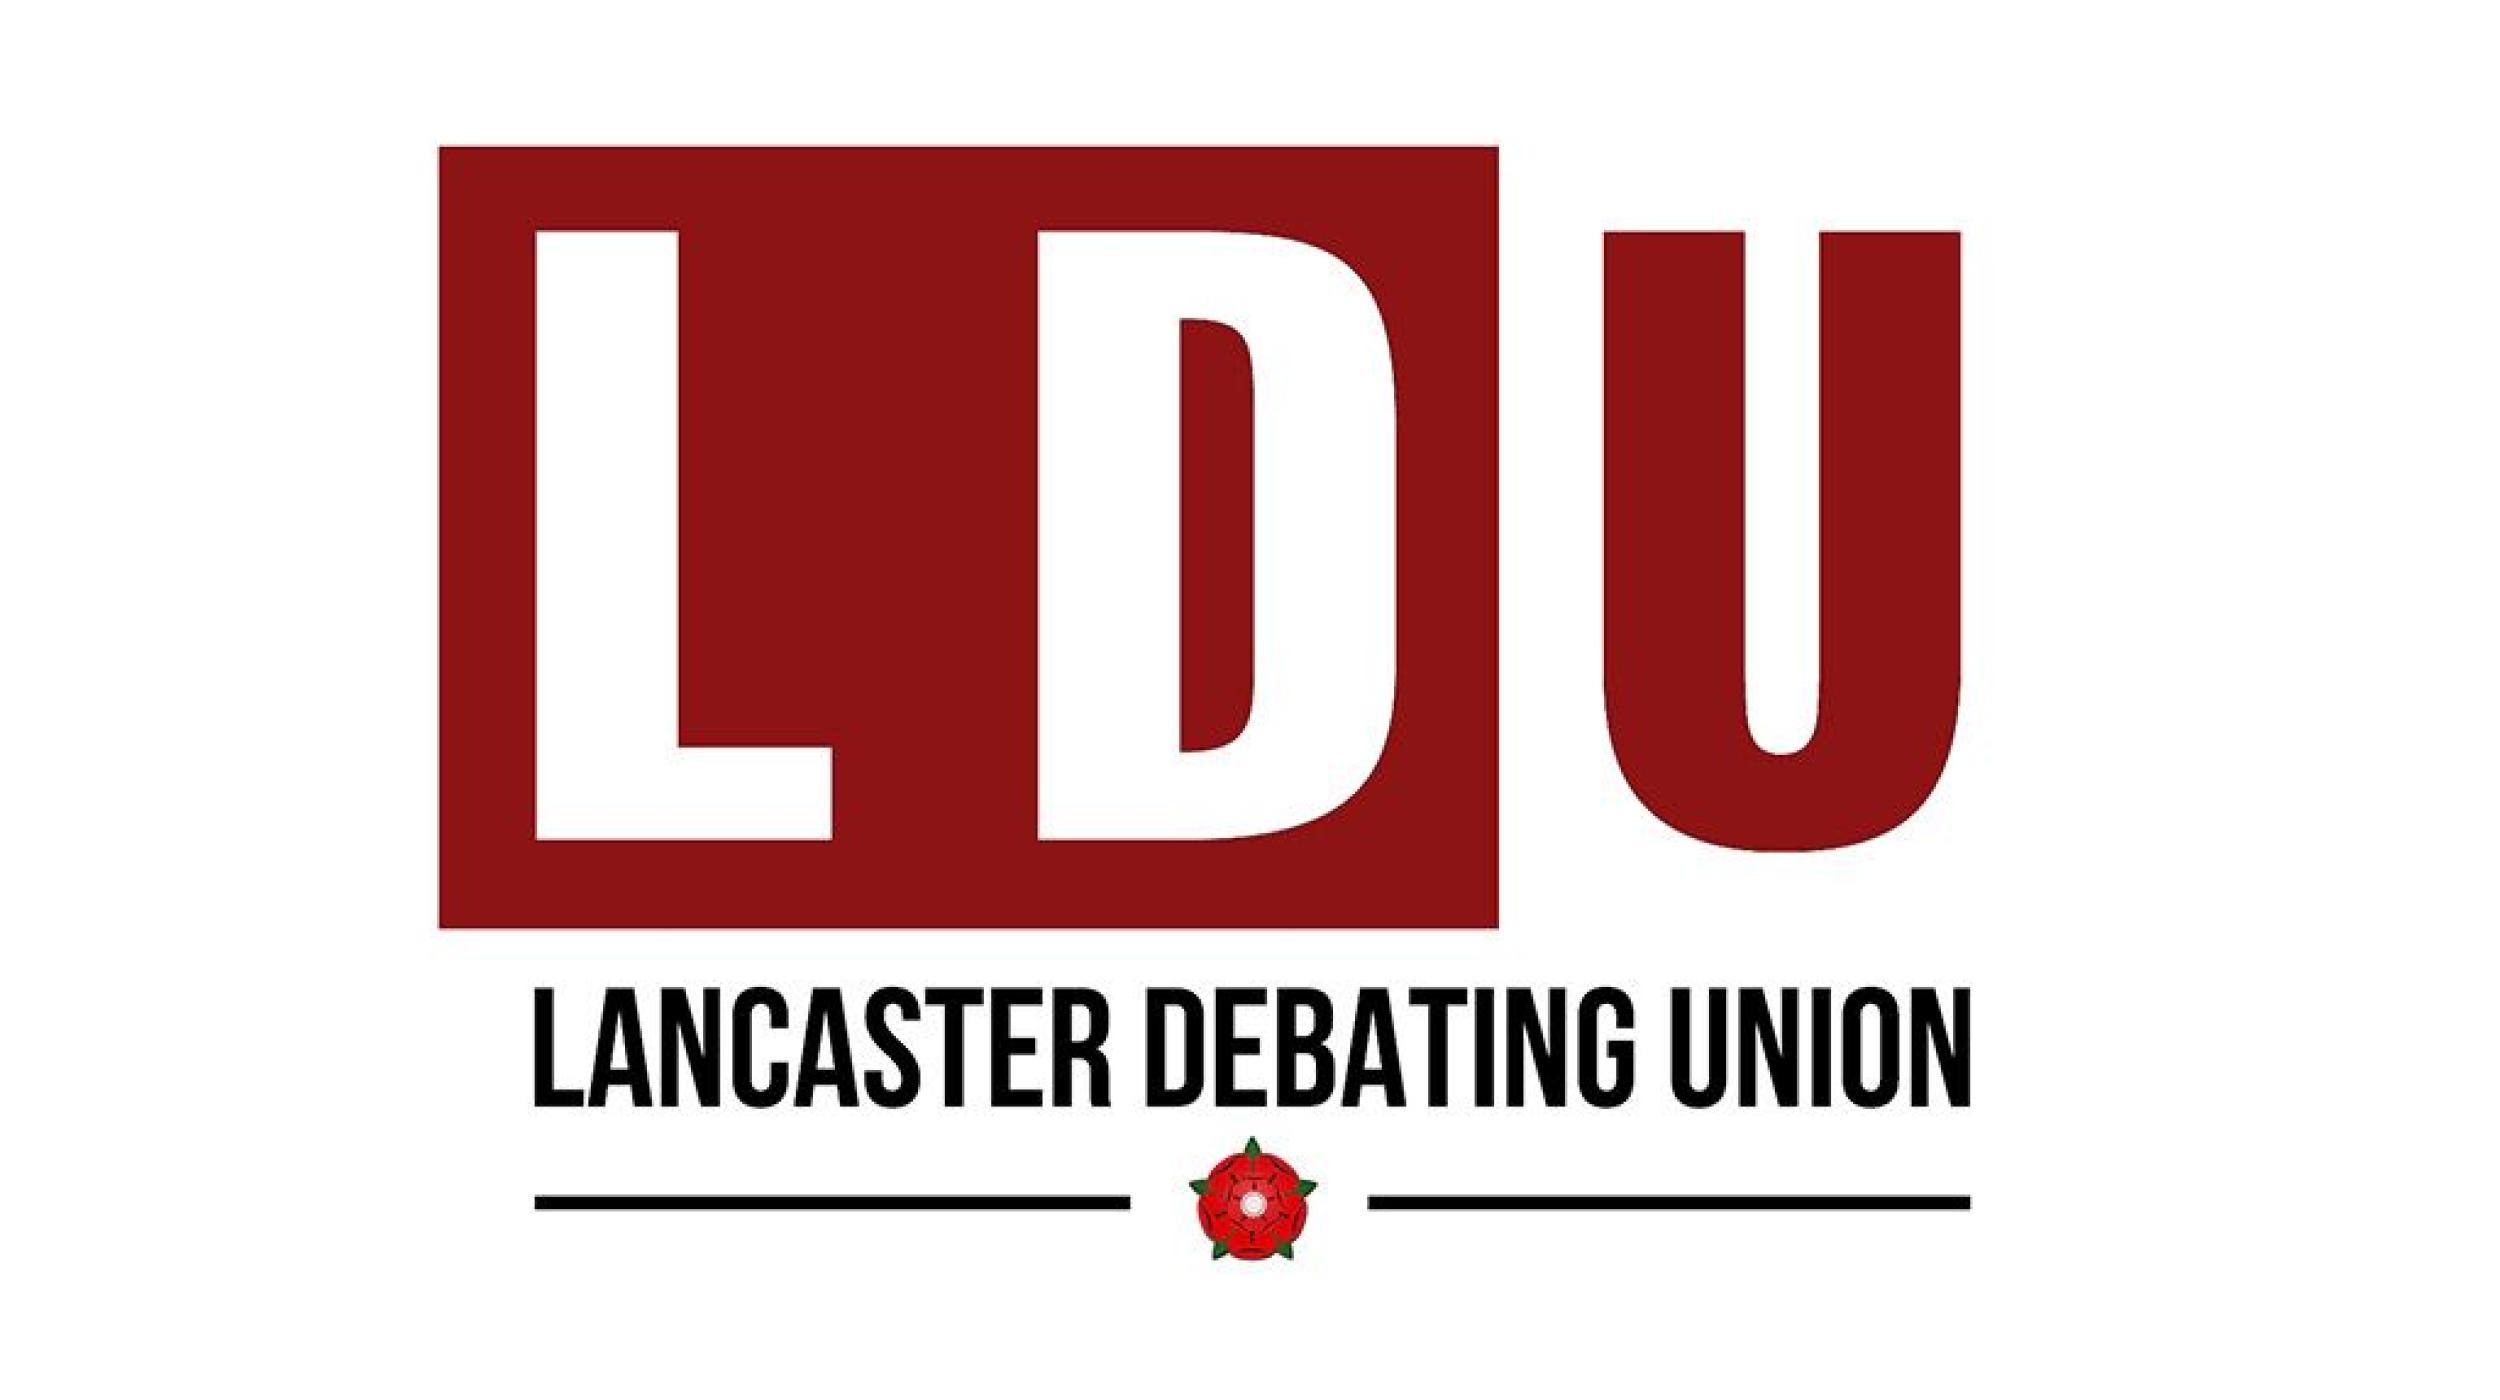 Lancaster Debating Union - Should Tuition Fees Be Abolished?